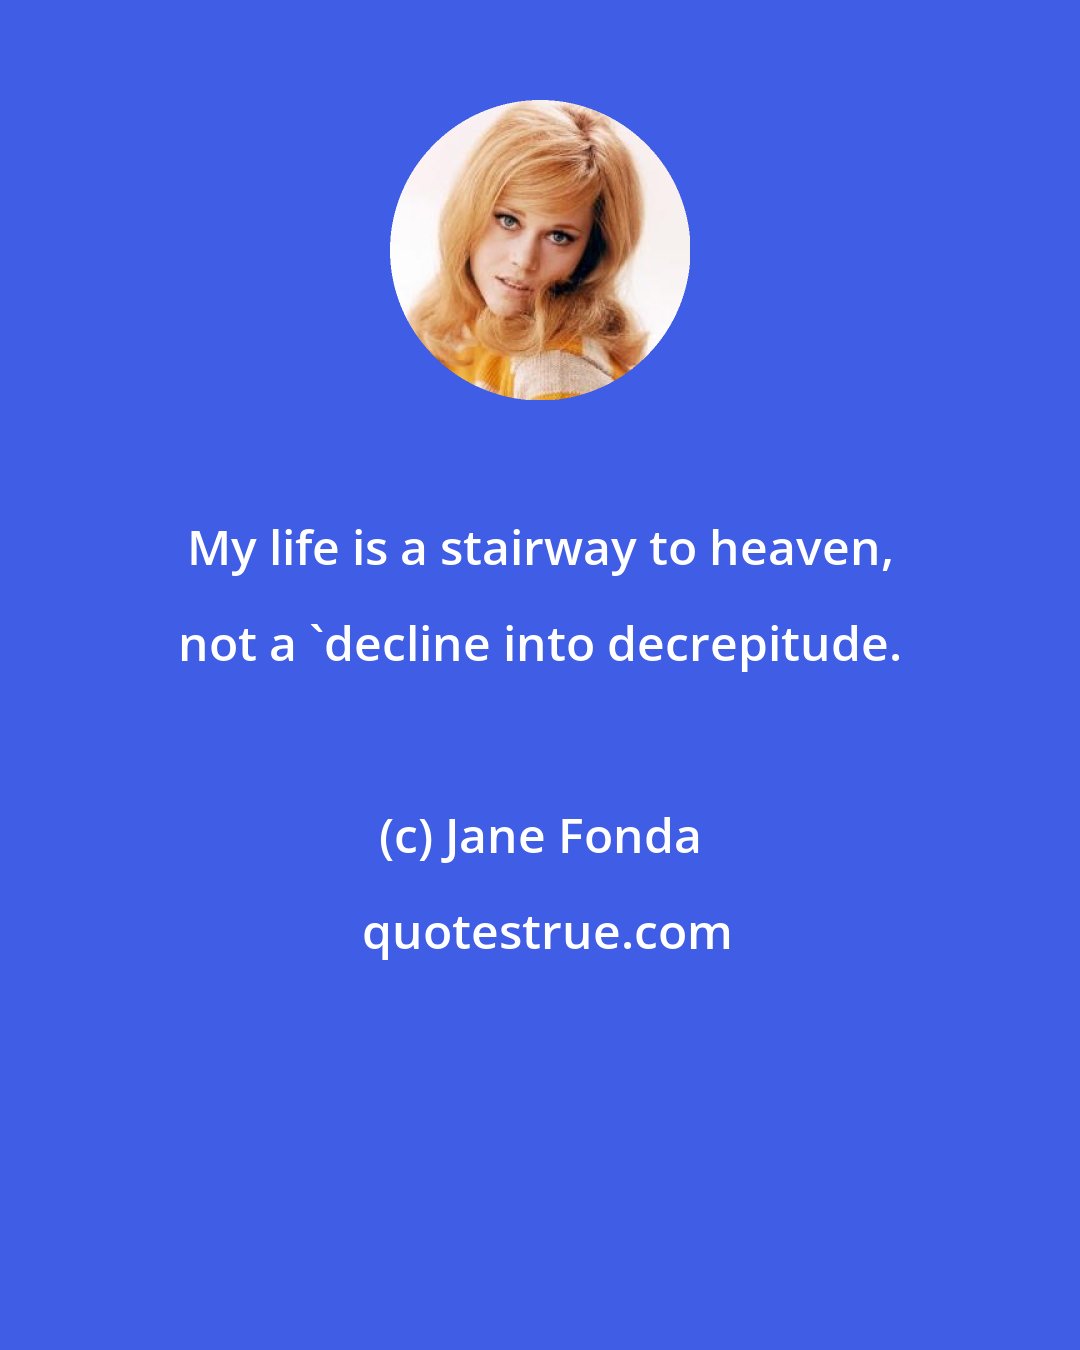 Jane Fonda: My life is a stairway to heaven, not a 'decline into decrepitude.